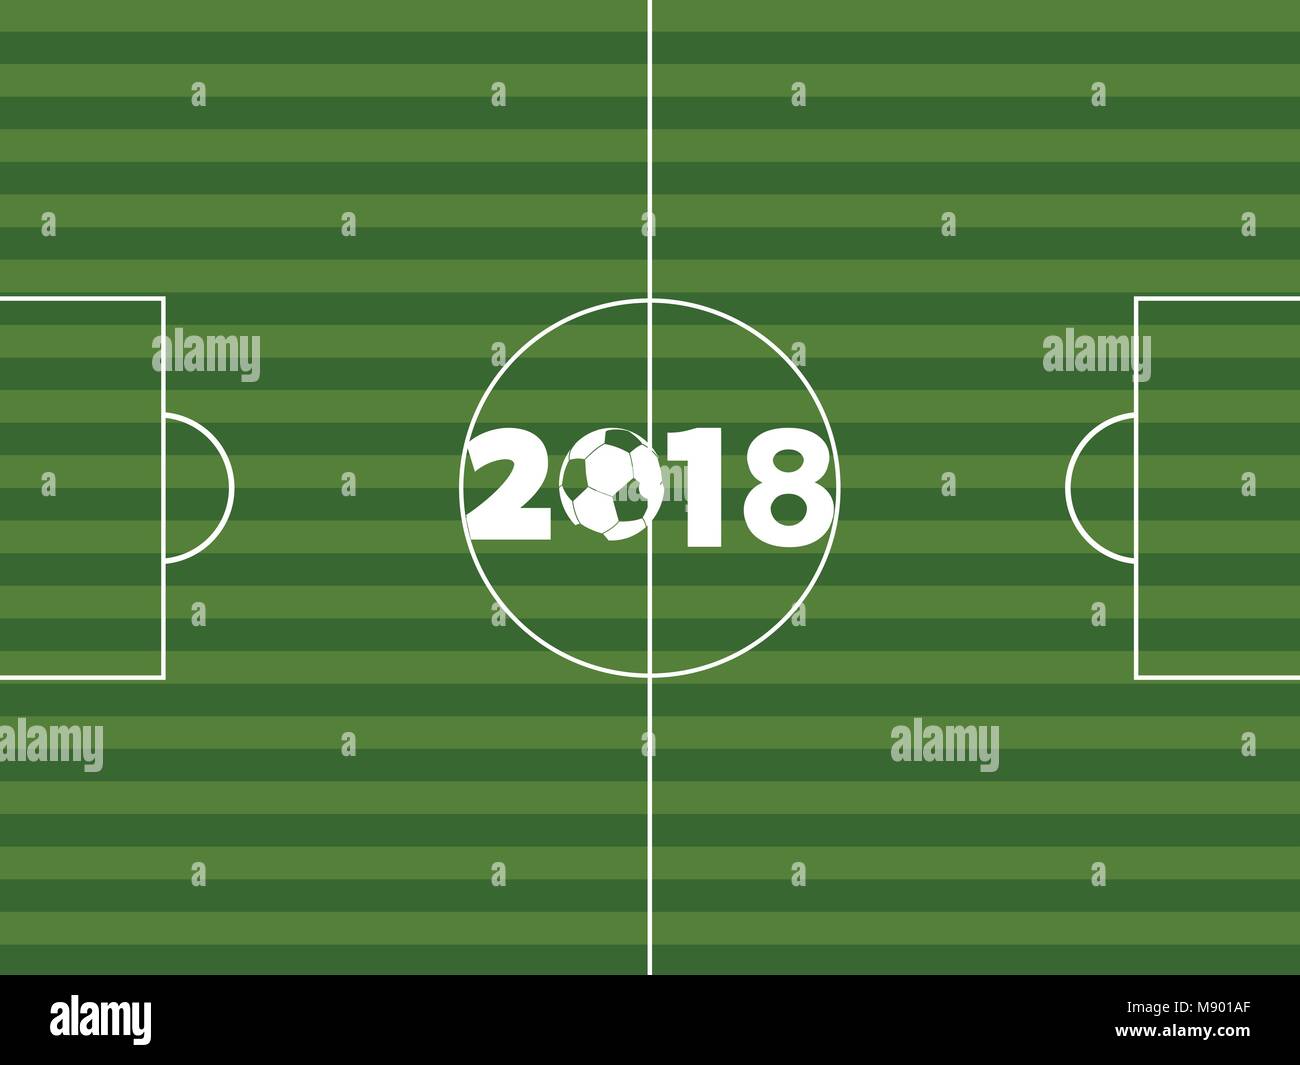 Soccer Football Green Pitch with 2018 Decorated with Ball Background Stock Vector